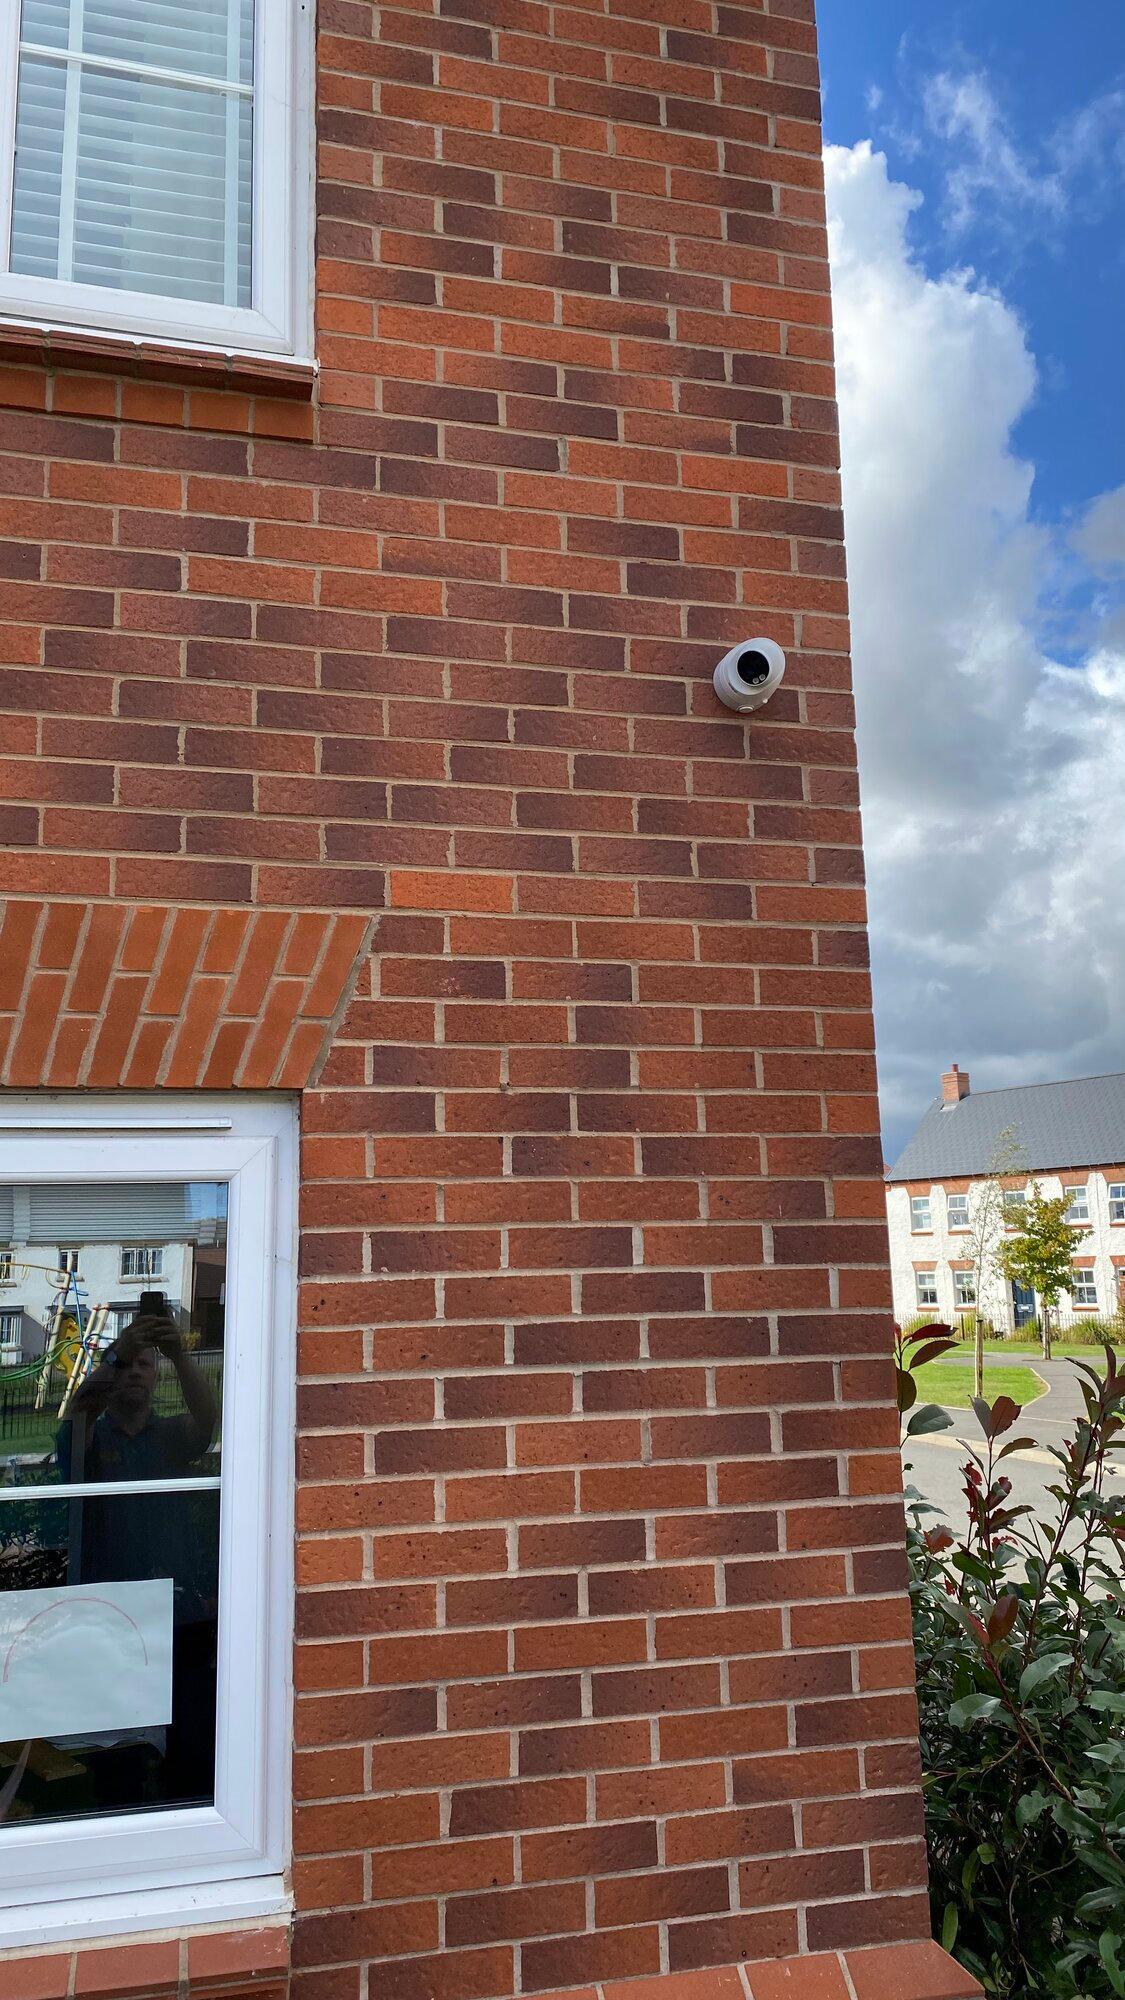 Images Wilson Security Systems Ltd.